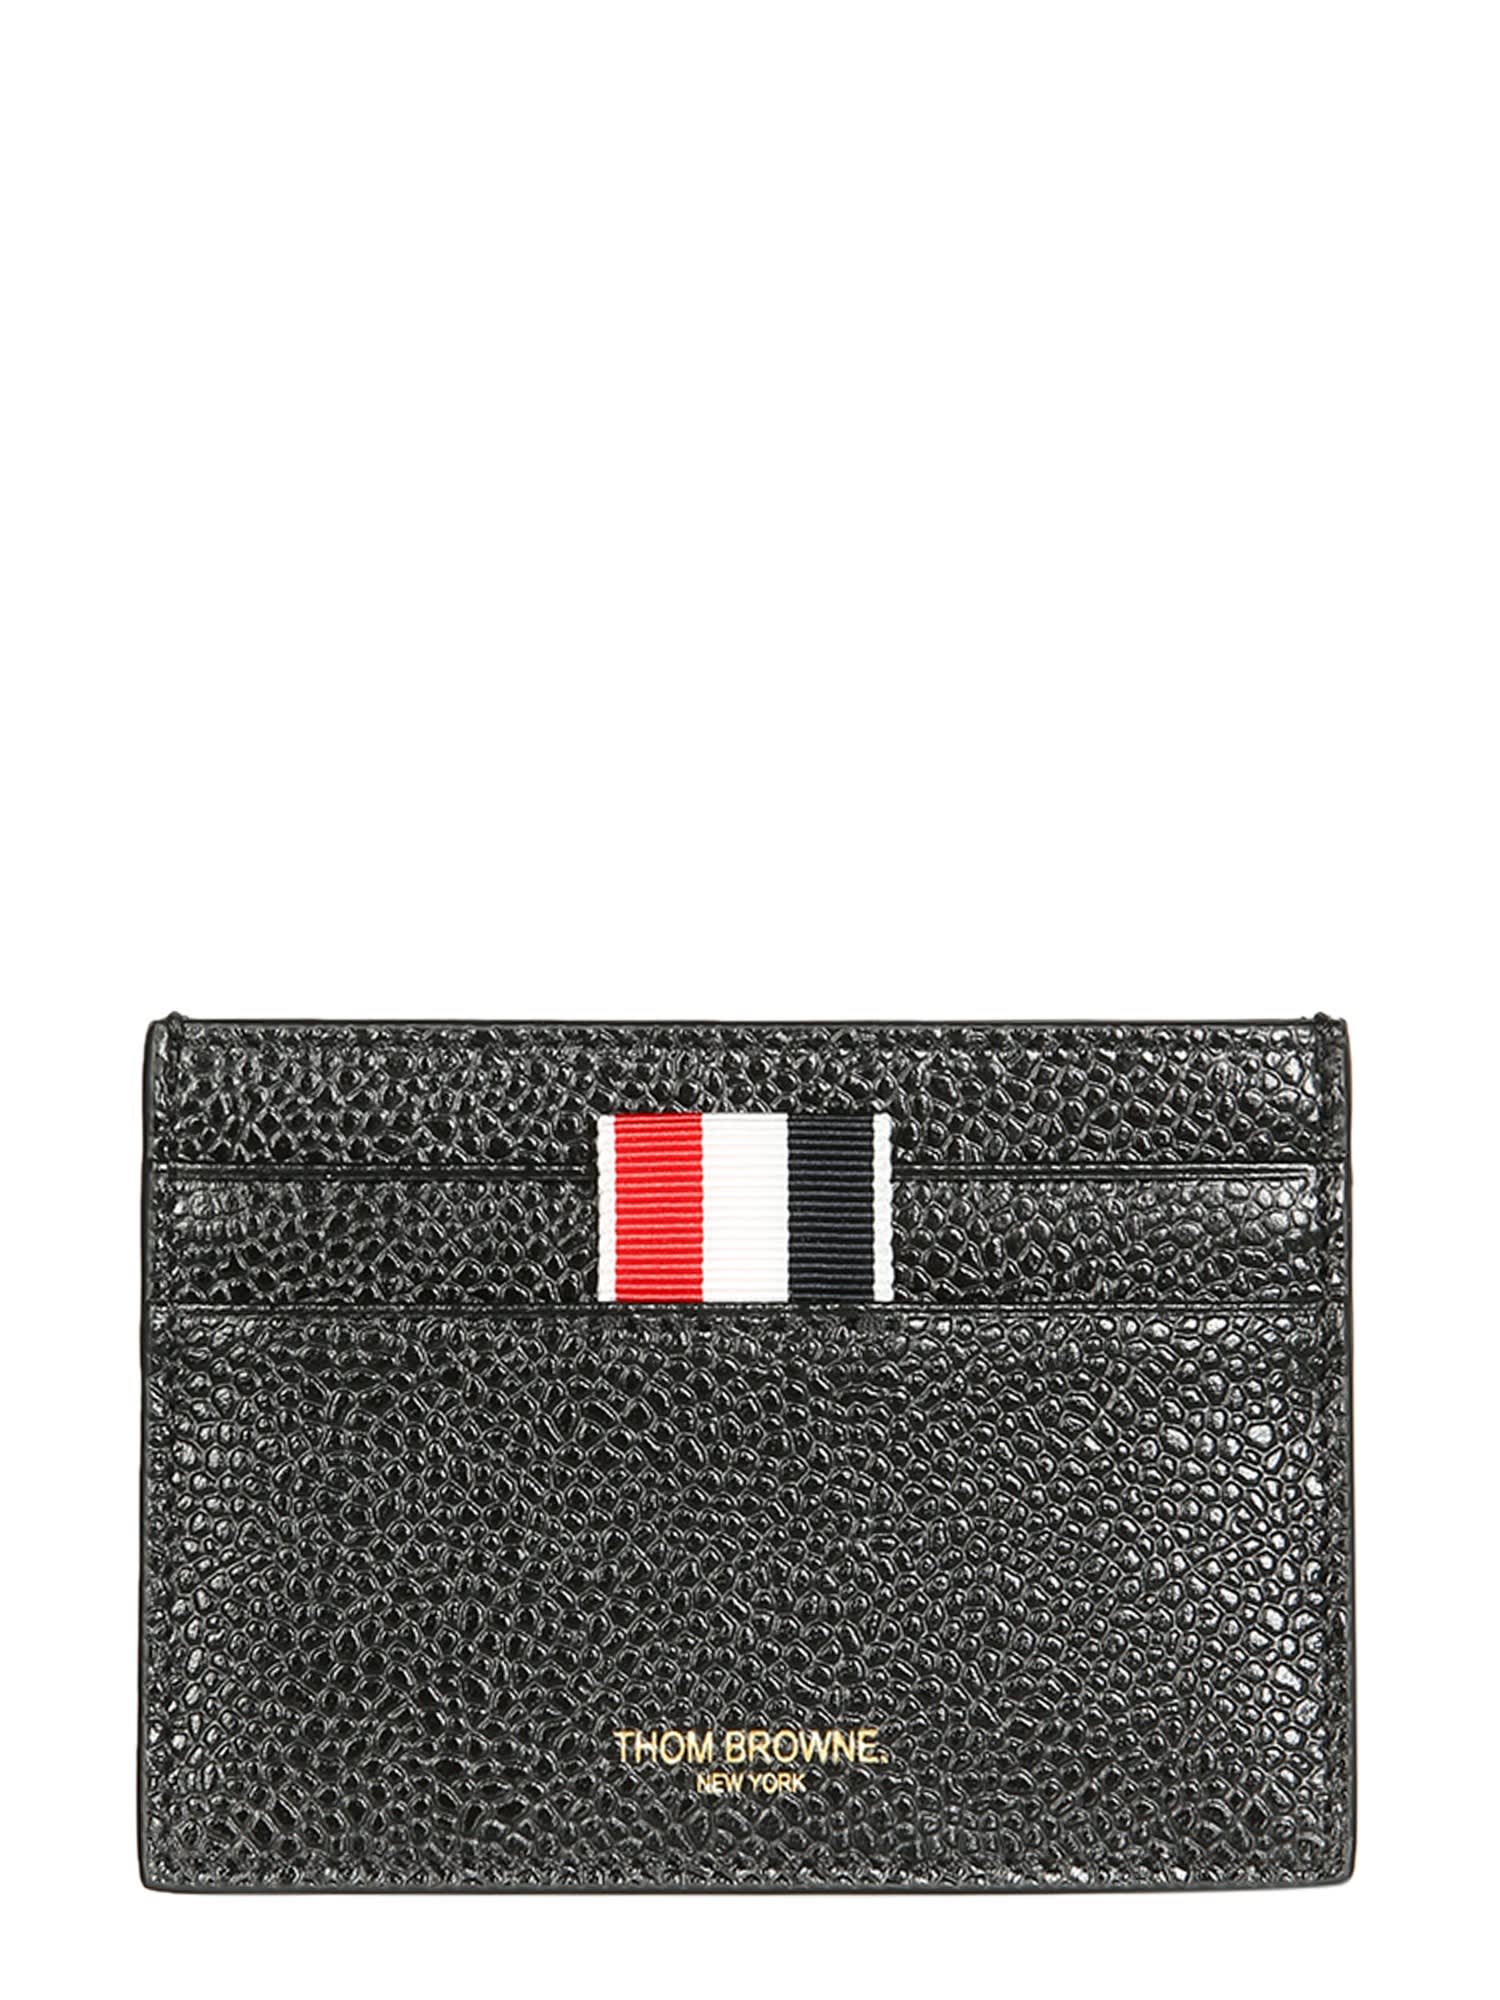 THOM BROWNE CARD HOLDER WITH LOGO,11887724